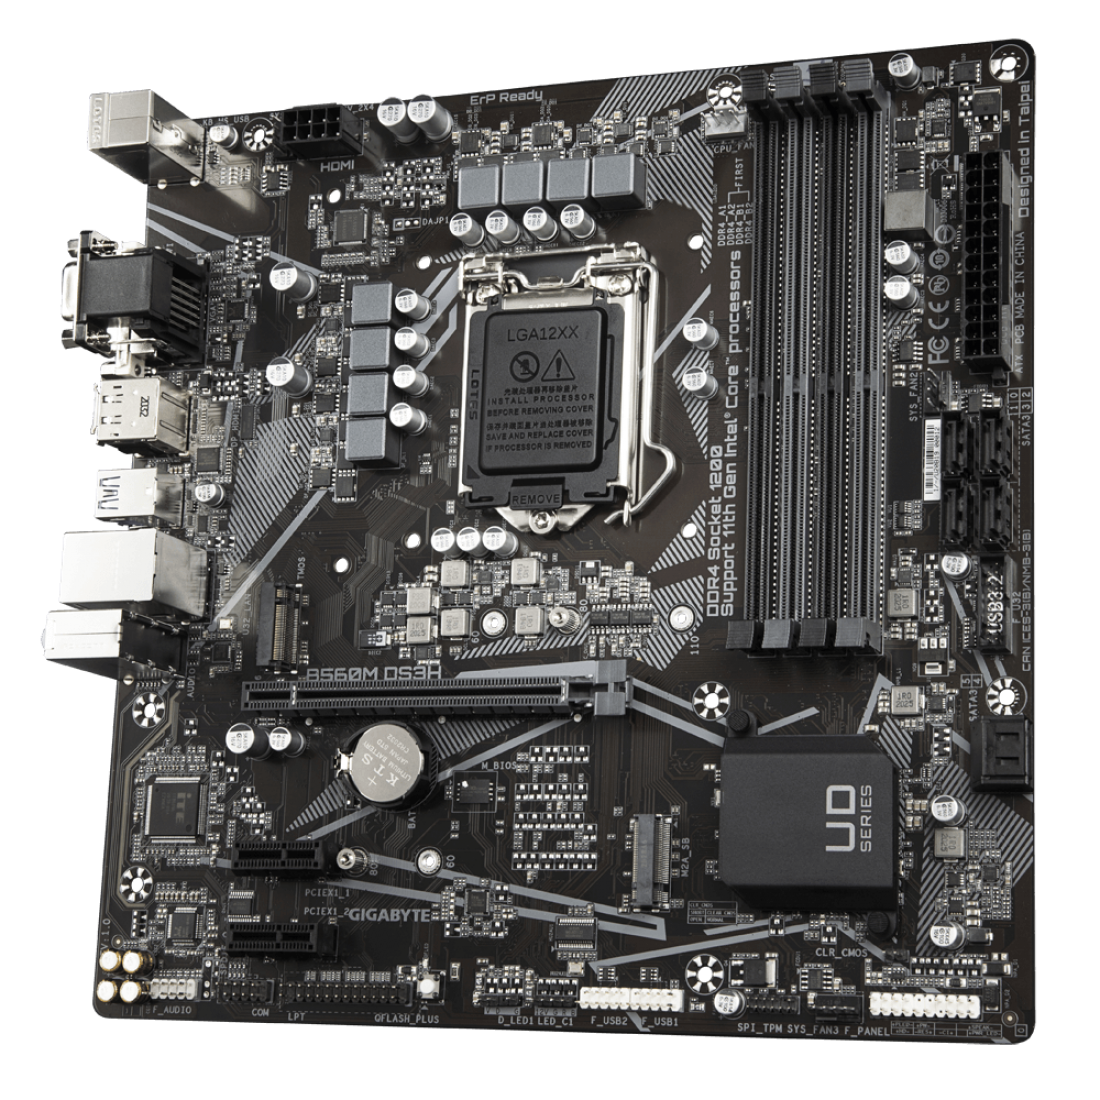 memory to use gigabyte ultra durable motherboard